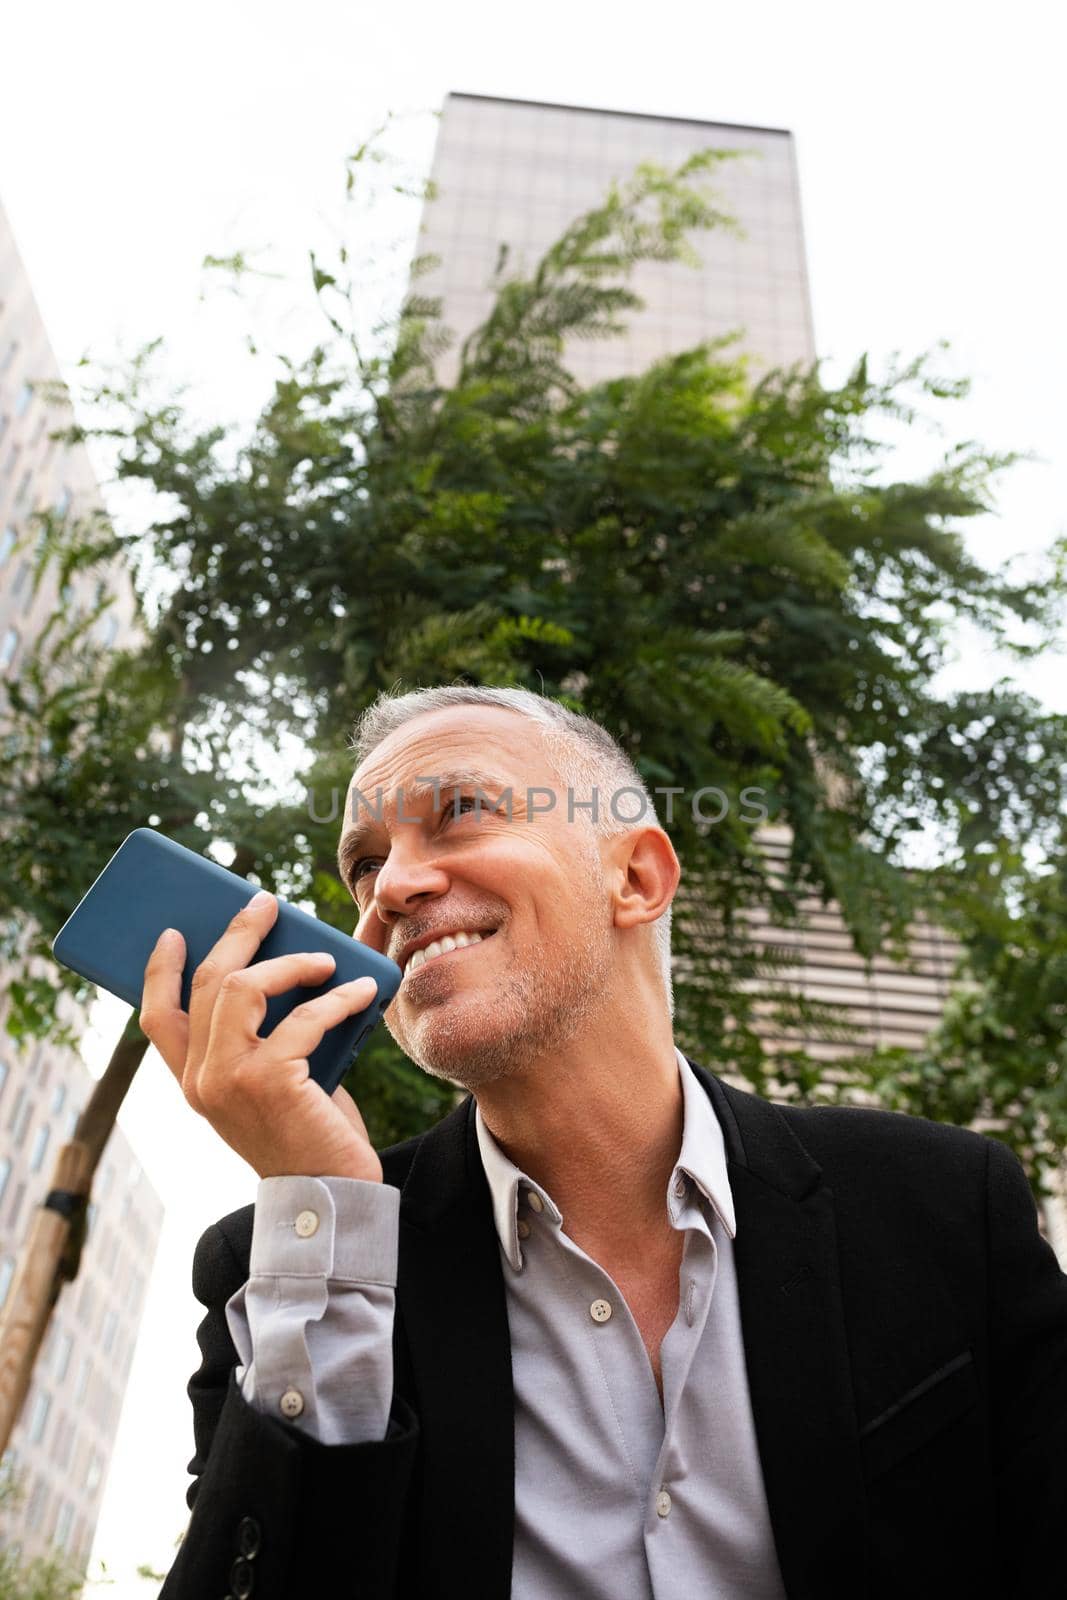 Smiling caucasian man sending voice message with mobile phone outdoors. Copy space. Vertical image. Business and technology concept.